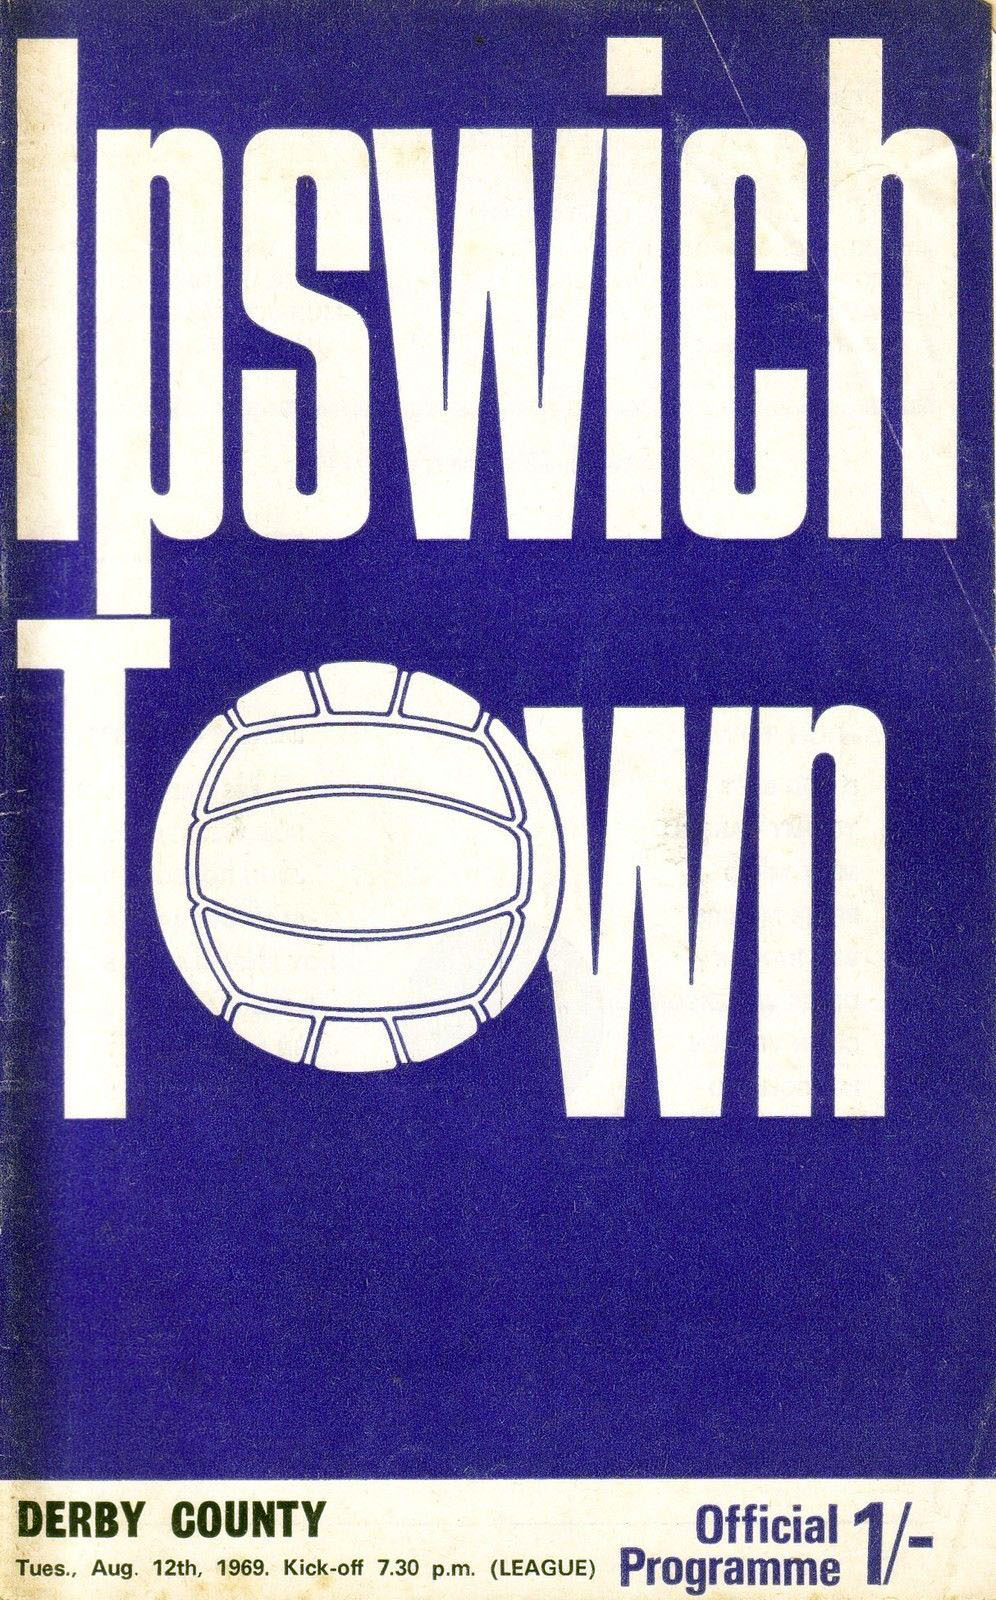 English Football Program: Ipswich Town vs. Derby County (August 12, 1969)